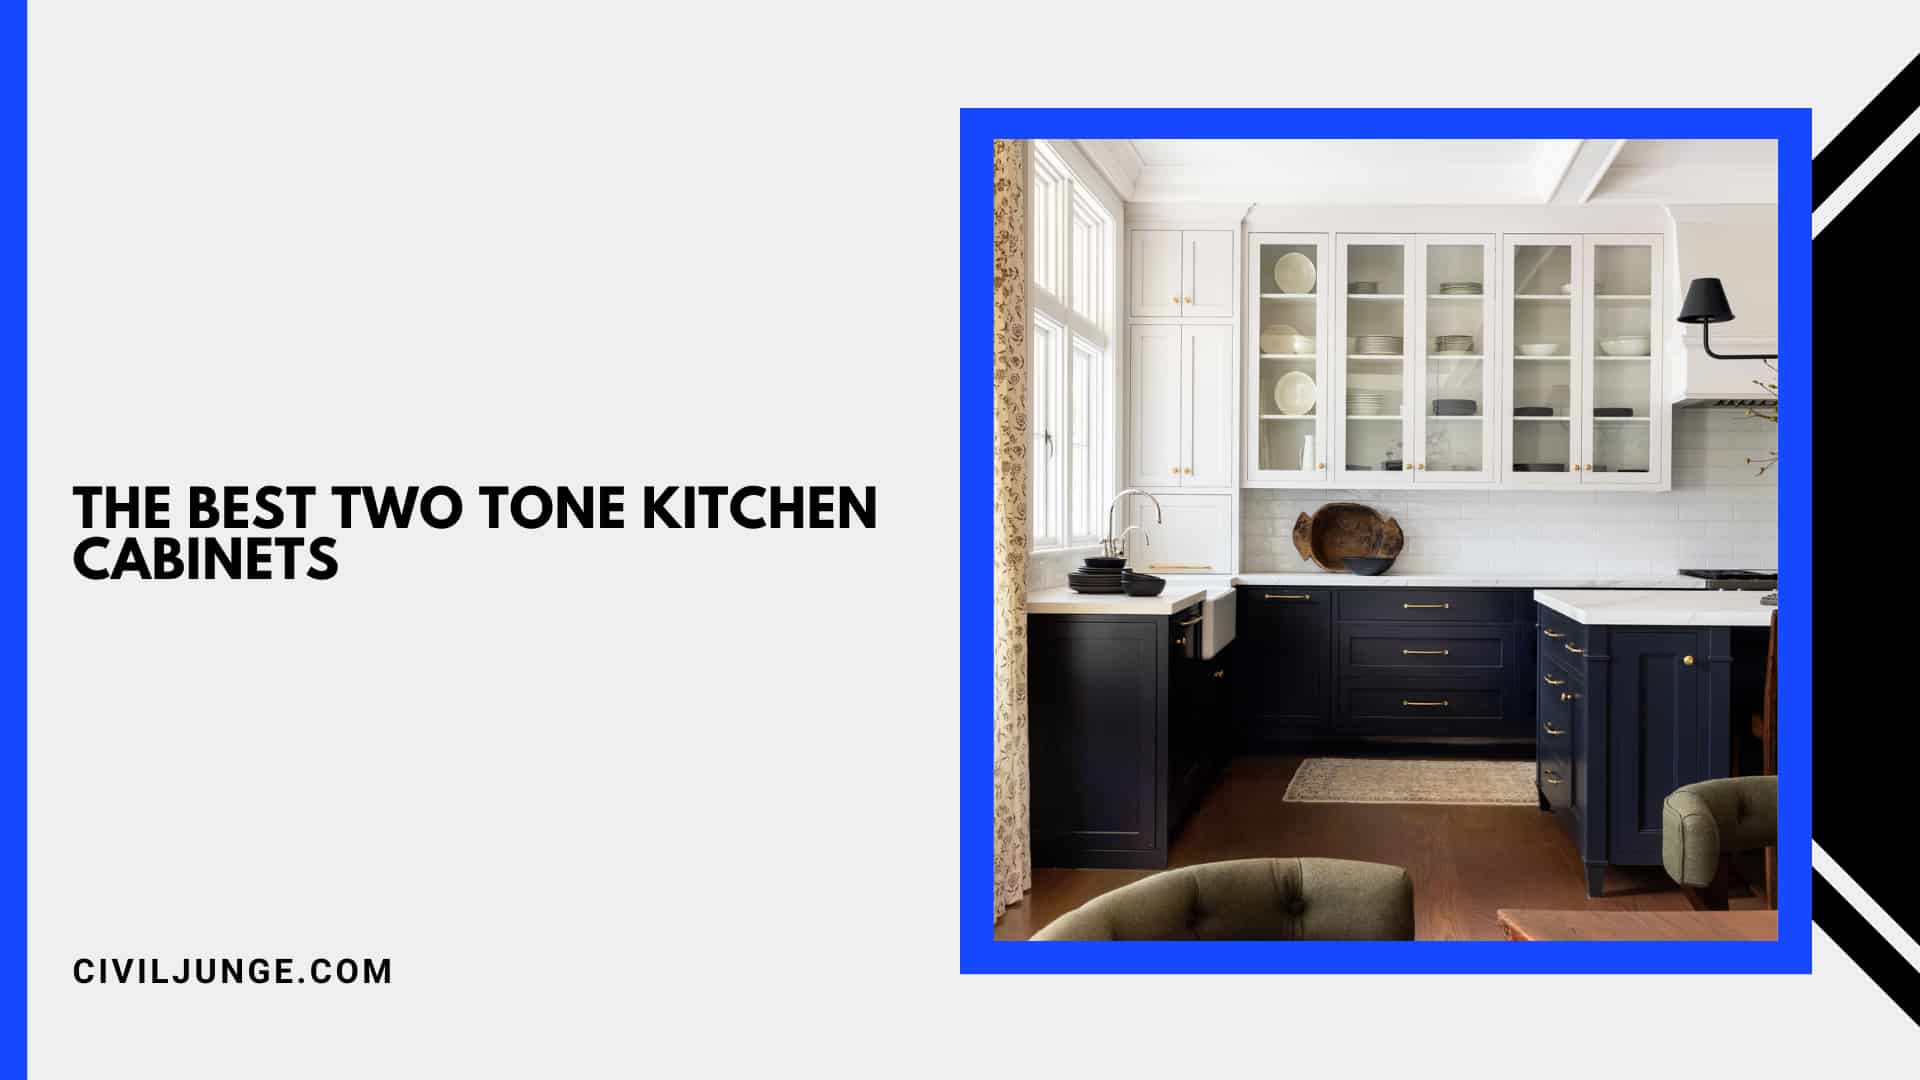 The Best Two Tone Kitchen Cabinets